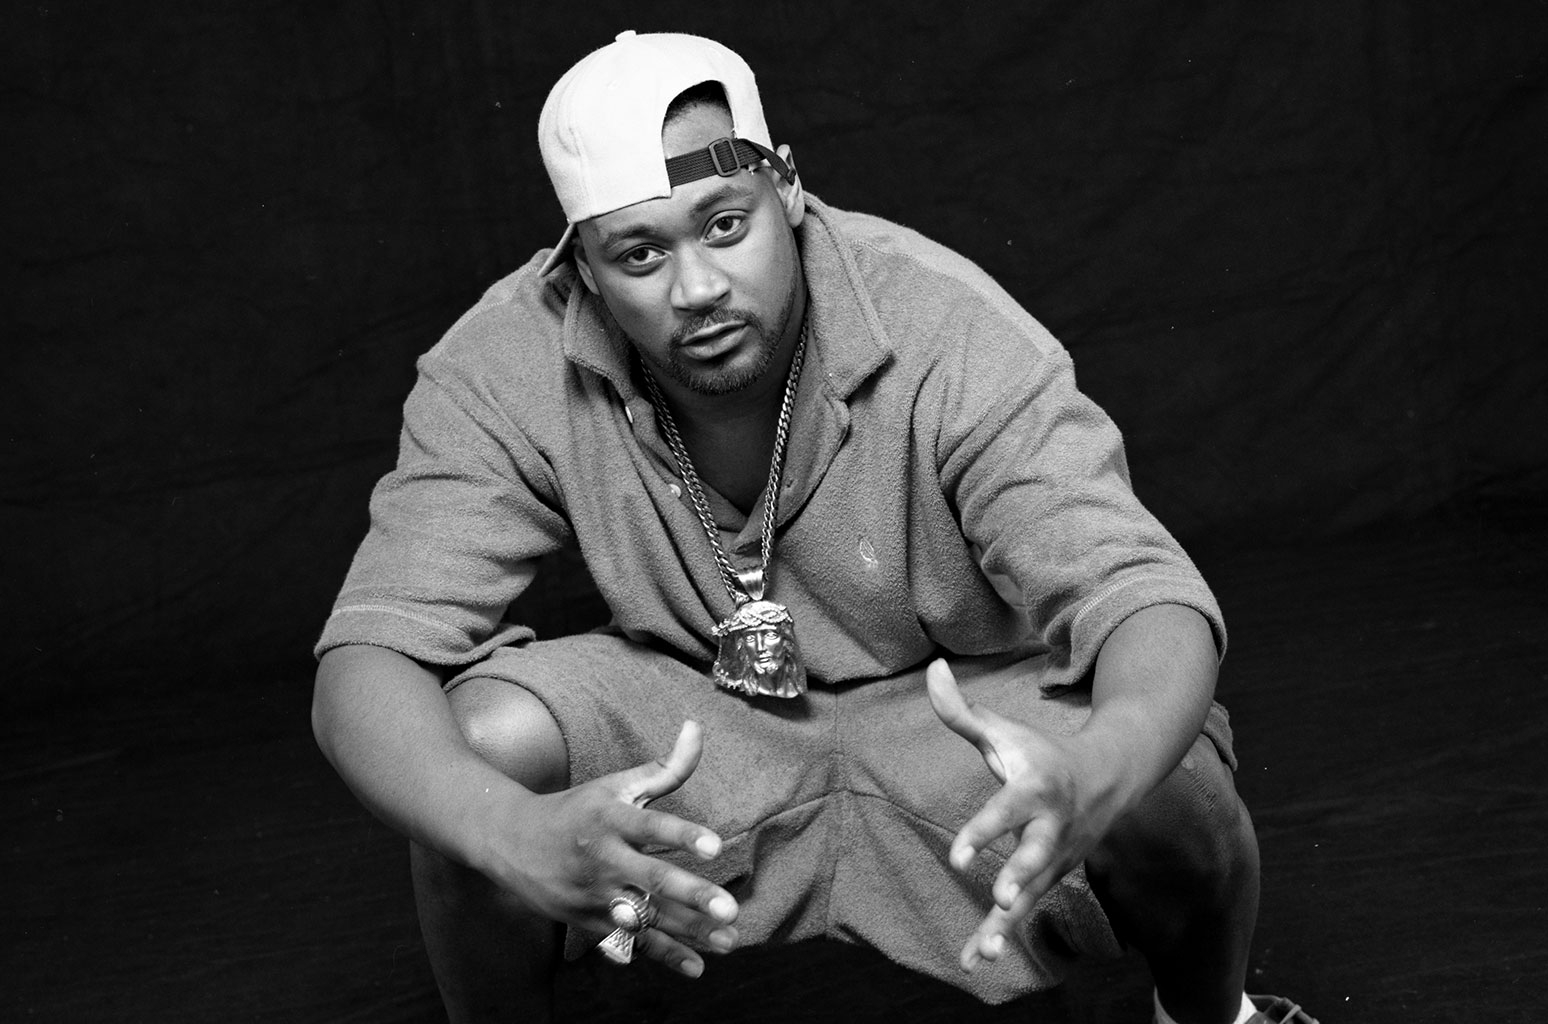 25 Years Later, Ghostface Killah Reflects on the Pain & Trauma That